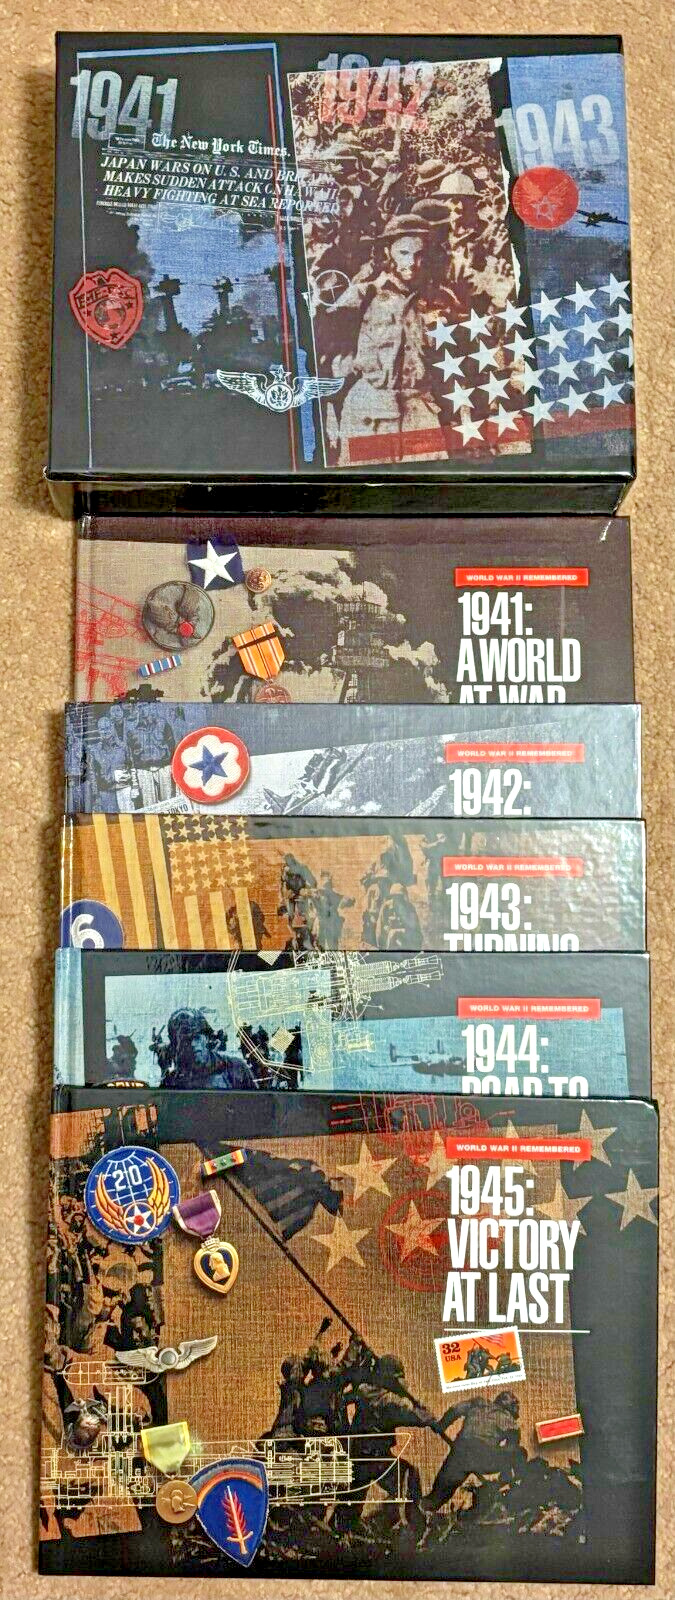 WW2 REMEMBERED 1941, 1942, 1943, 1944, 1945 A WORLD AT WAR BOOKS W/STAMPS USPS